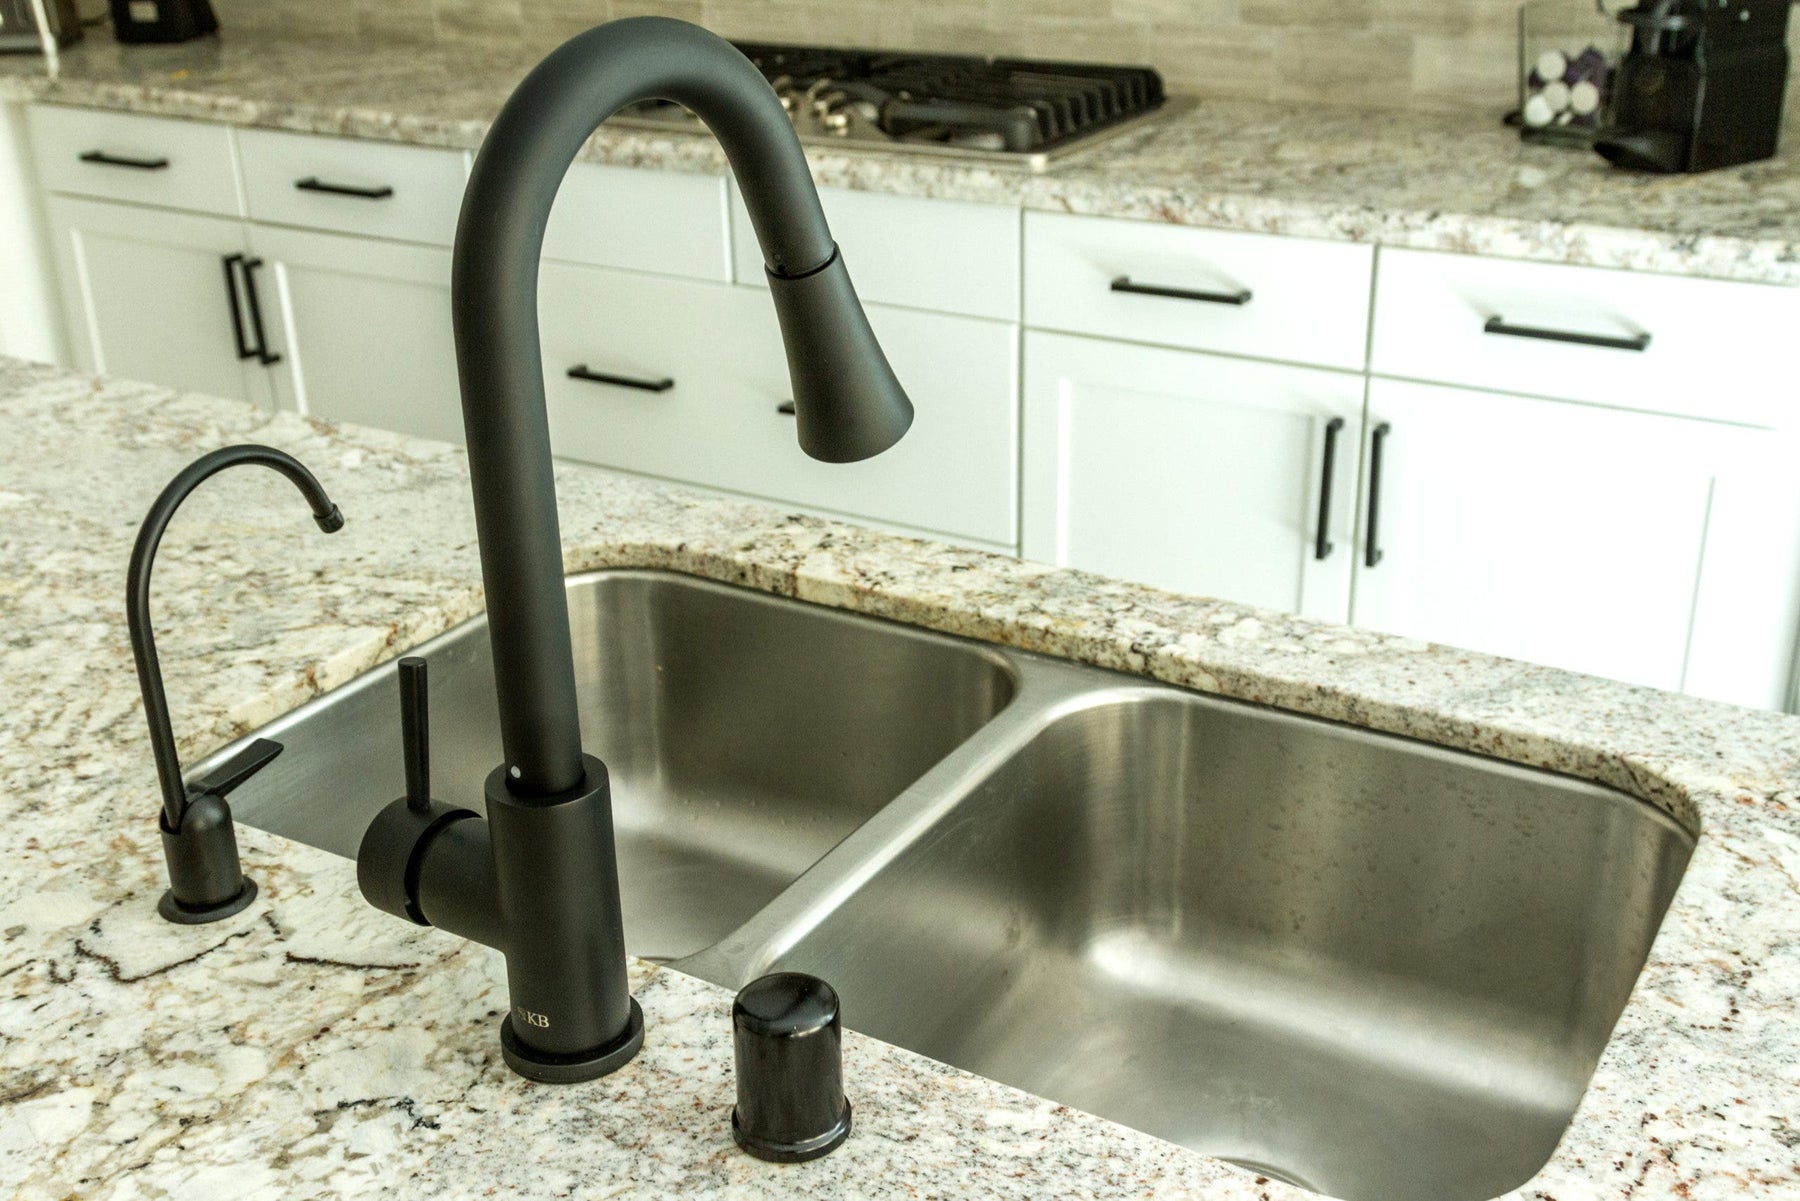 How to Choose a Faucet for Your Modern Kitchen